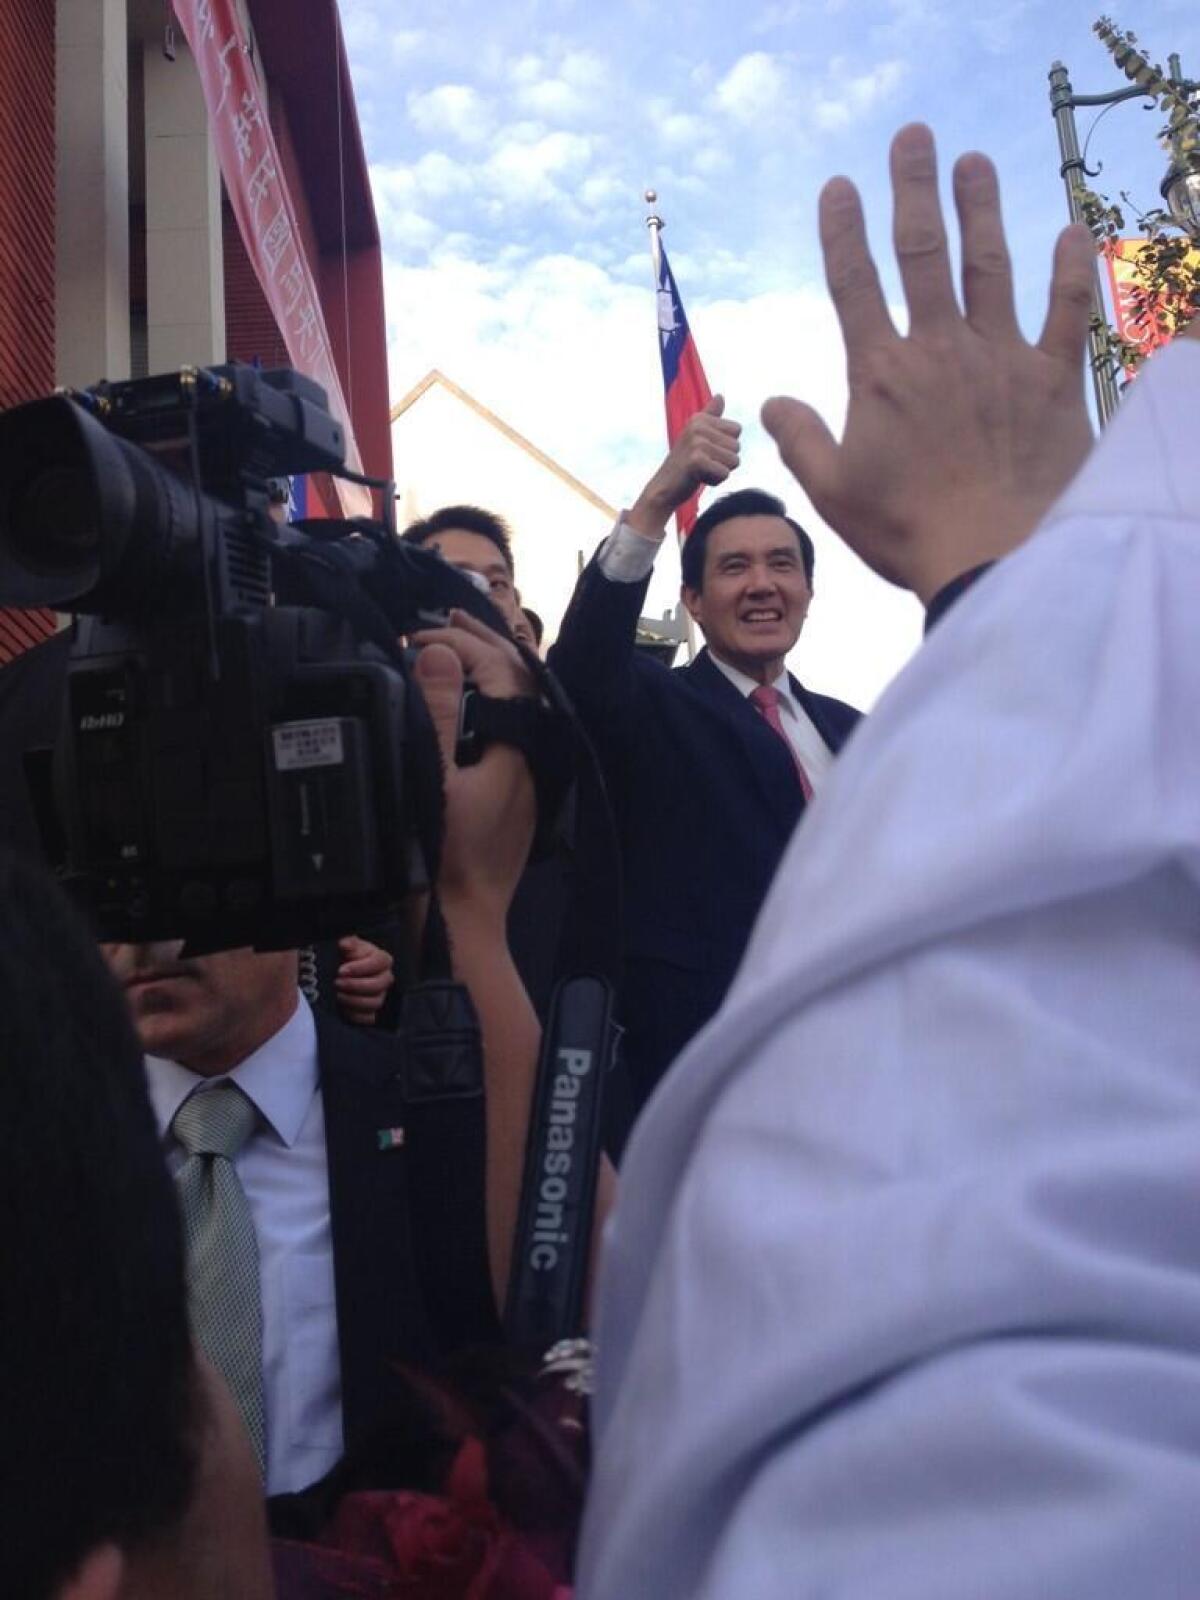 Taiwanese President Ma Ying-jeou gestures to supporters during a visit to Los Angeles' Chinatown on Tuesday afternoon.